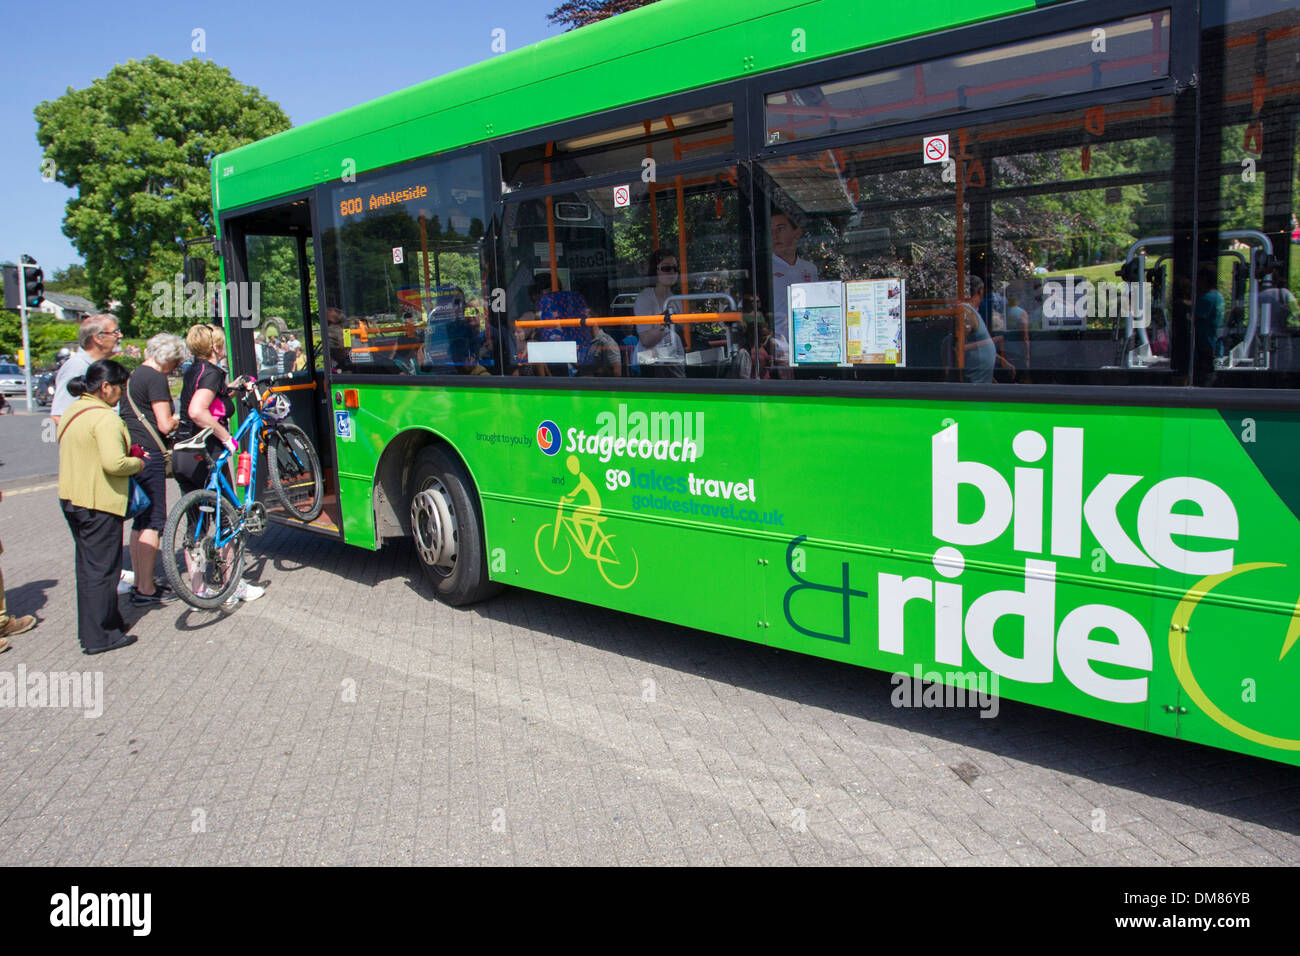 Bike Friendly Bus bike and ride bus The Lake District Bus specially